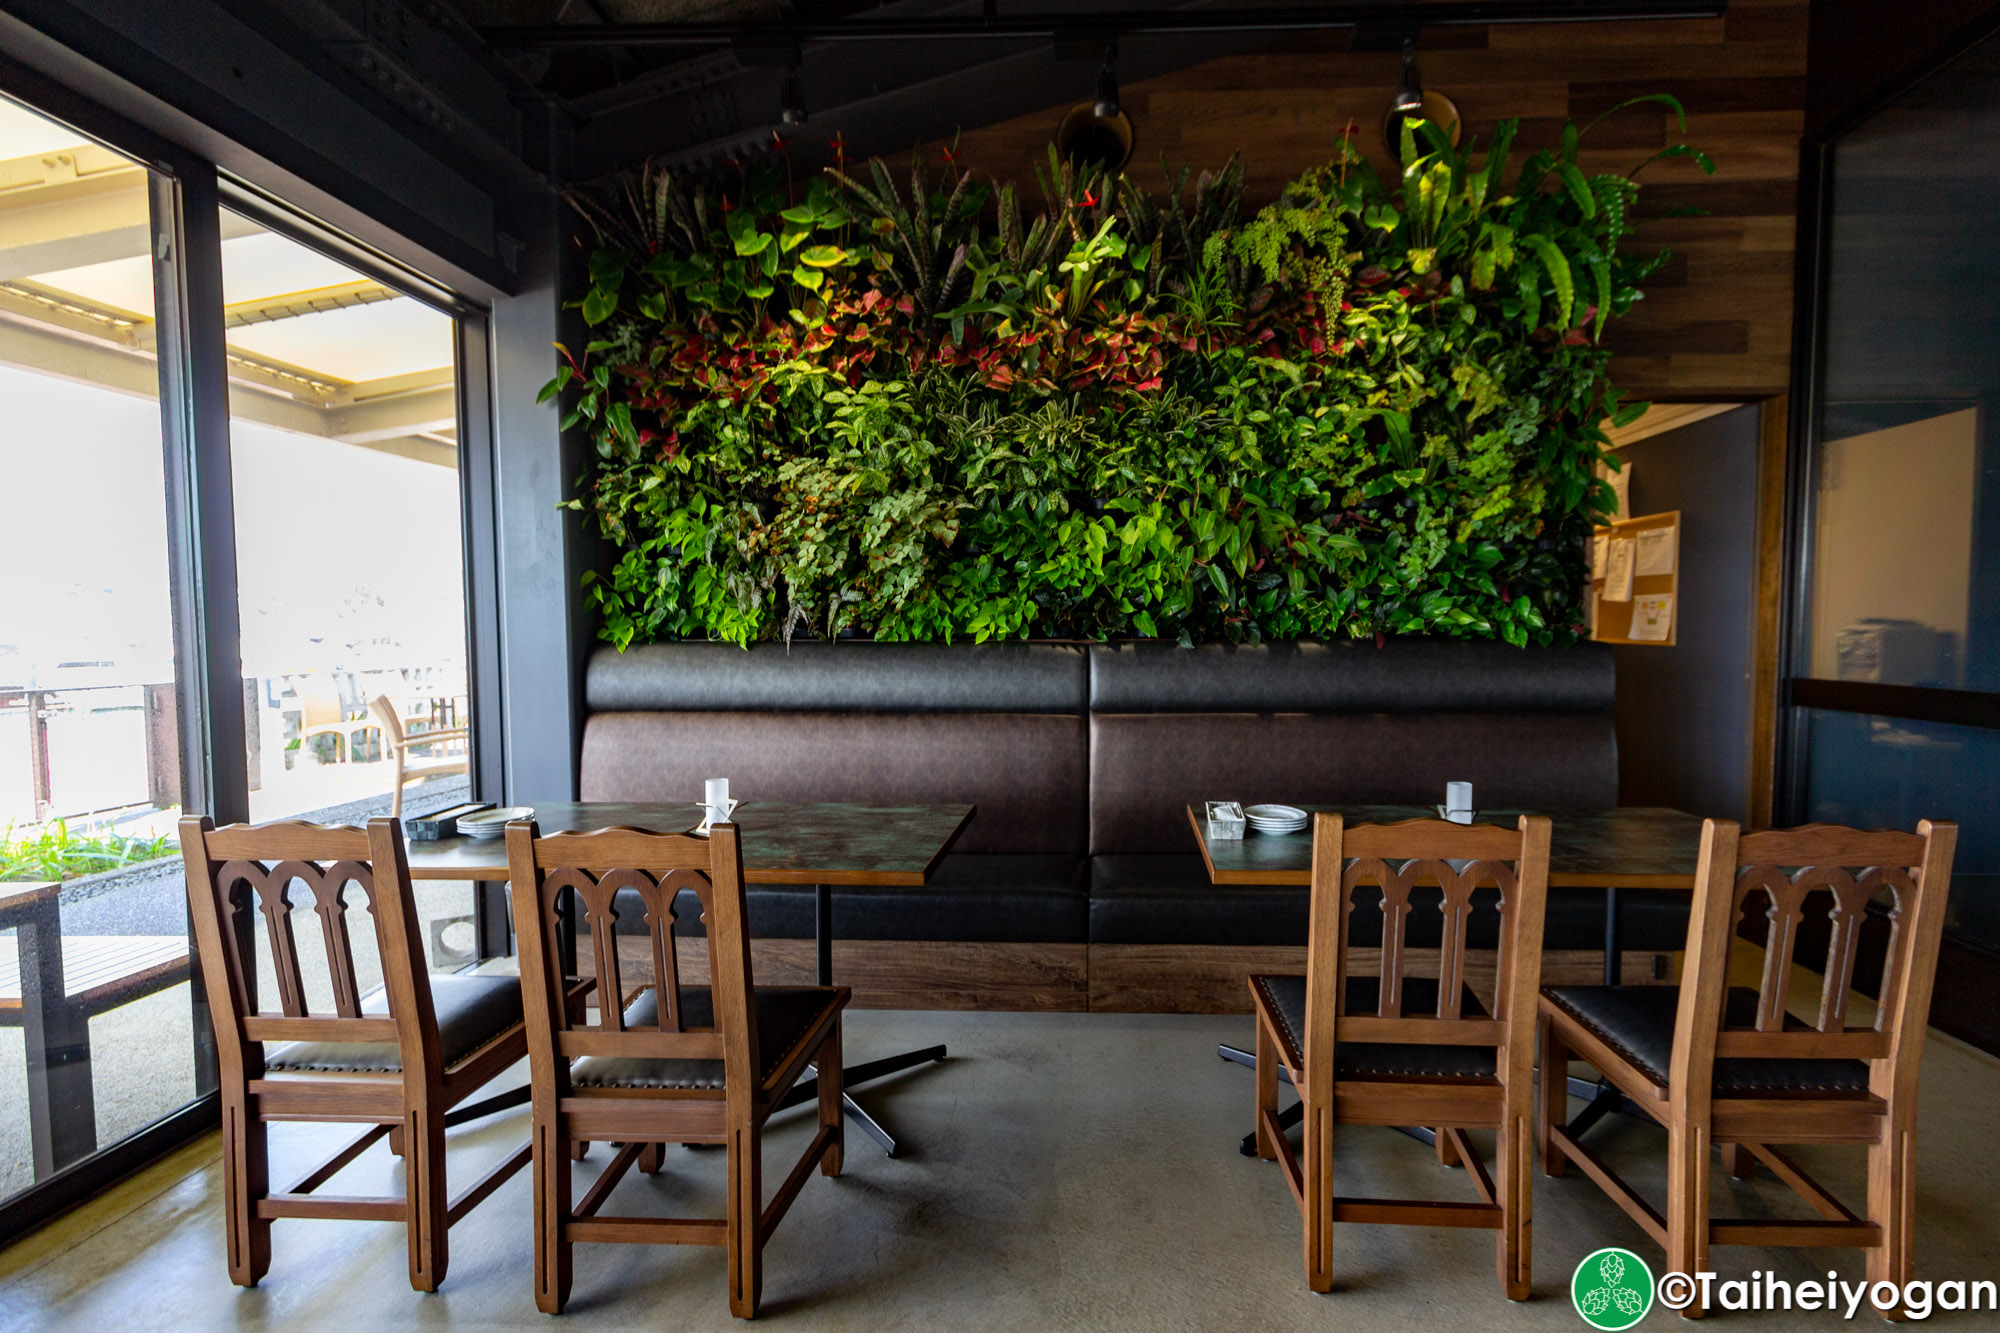 Chatan Harbor Brewery - Interior - Bar Area - Table Seating